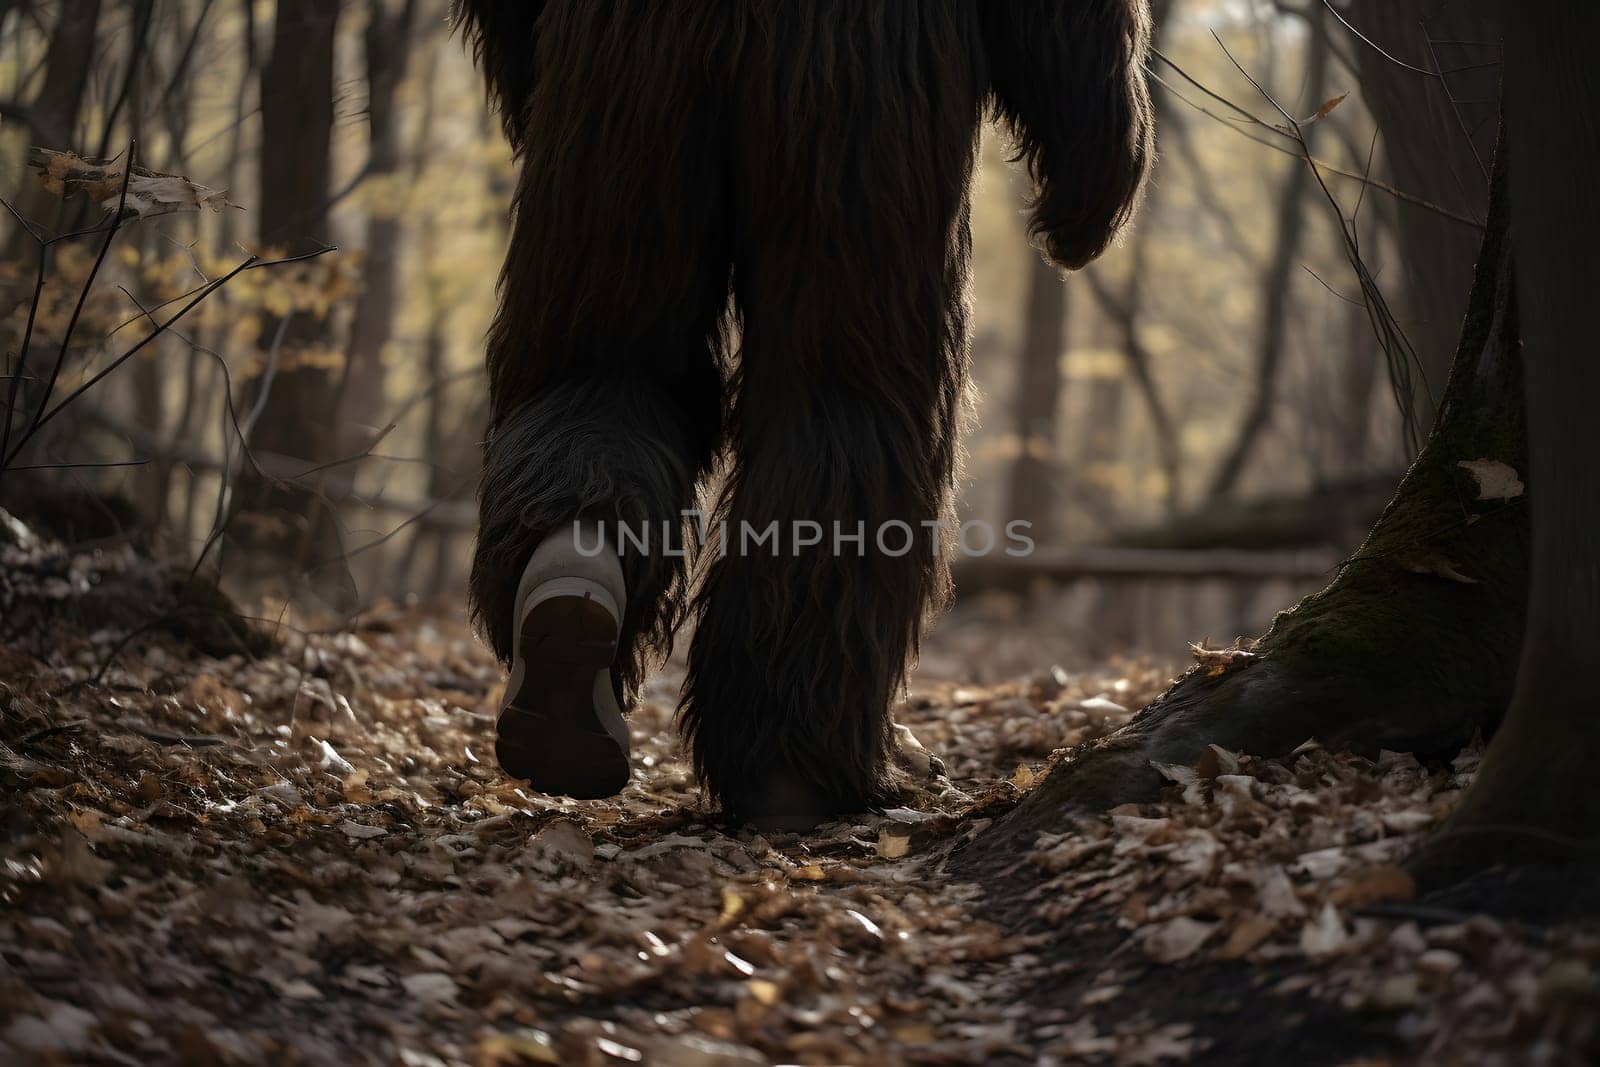 bigfoot in the woods walking at day time. Neural network generated in May 2023. Not based on any actual person, scene or pattern.